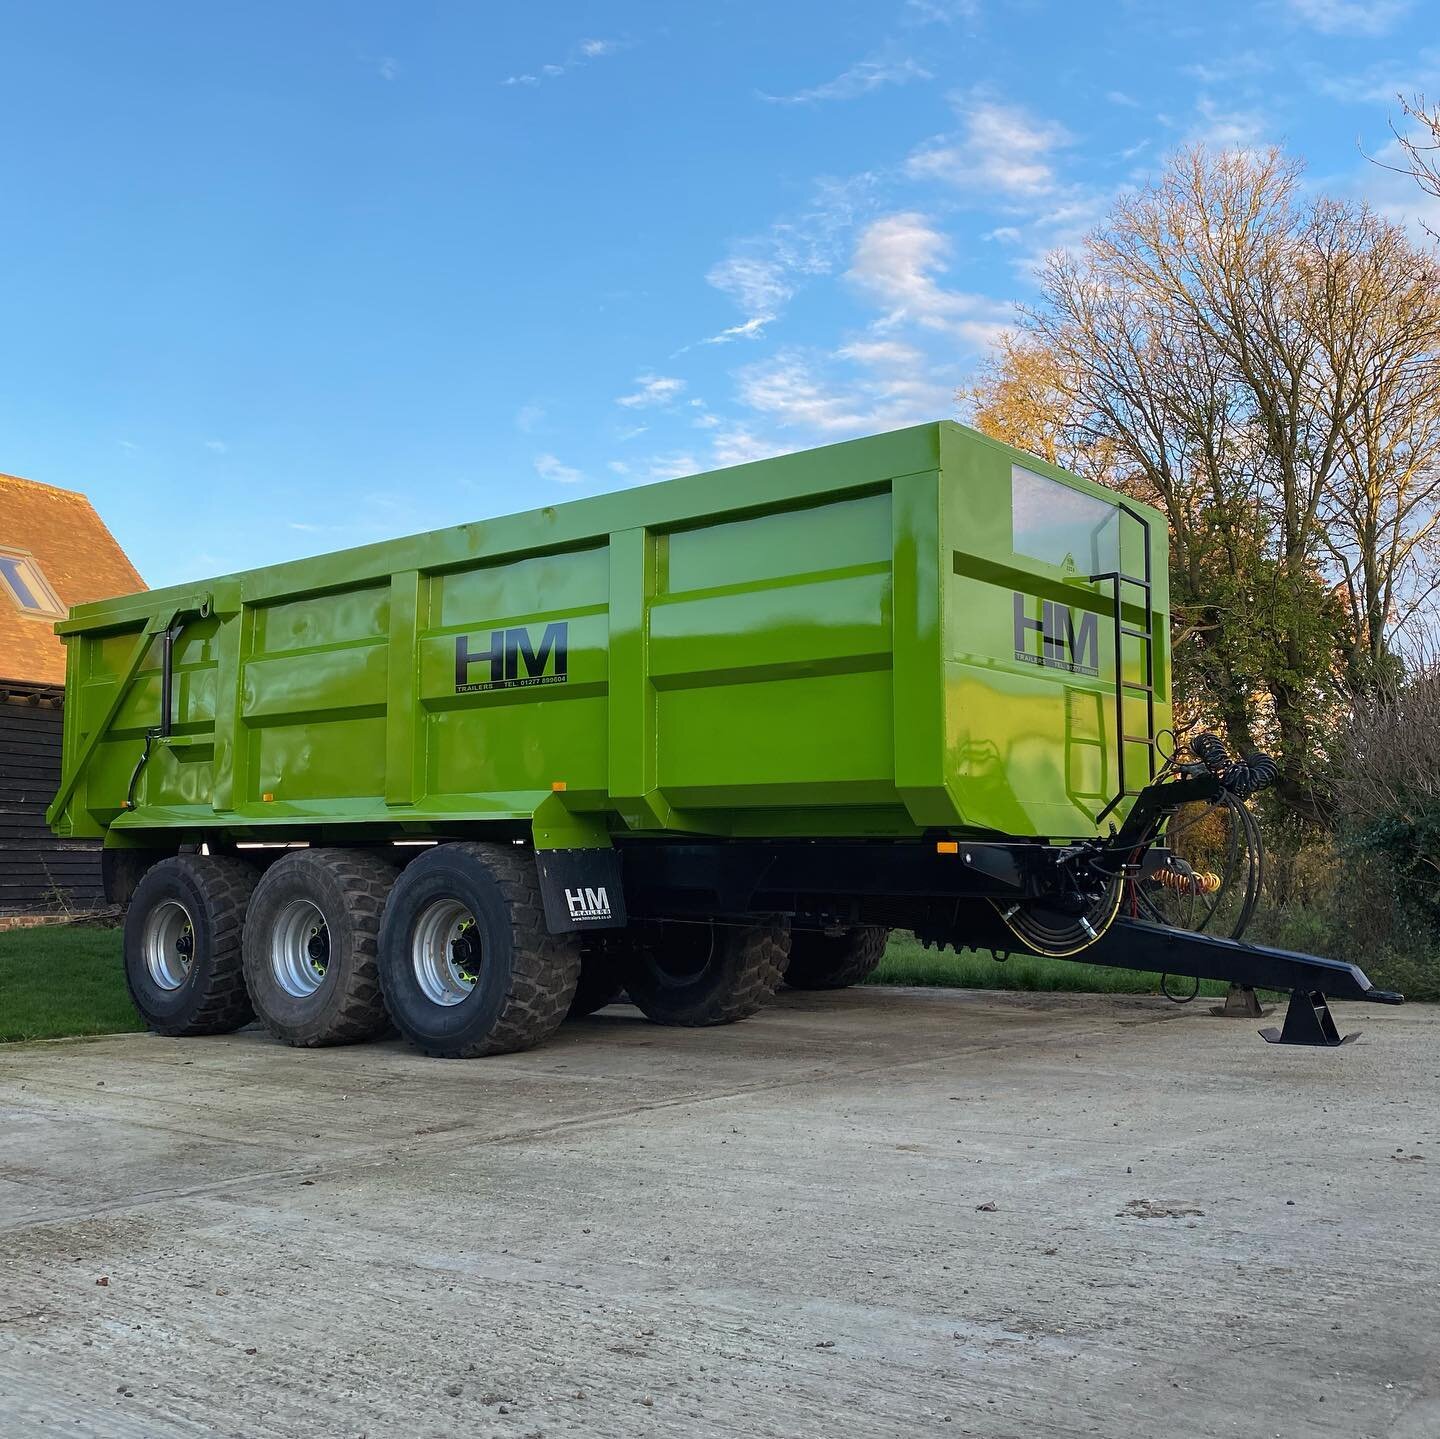 This HM 2224 came back to us for a respray after a hard life and many years of continuous use for both grain &amp; muck! Both chassis &amp; top buck have been bead blasted, followed by a fresh coat of two pack epoxy primer &amp; top coat.The new pain